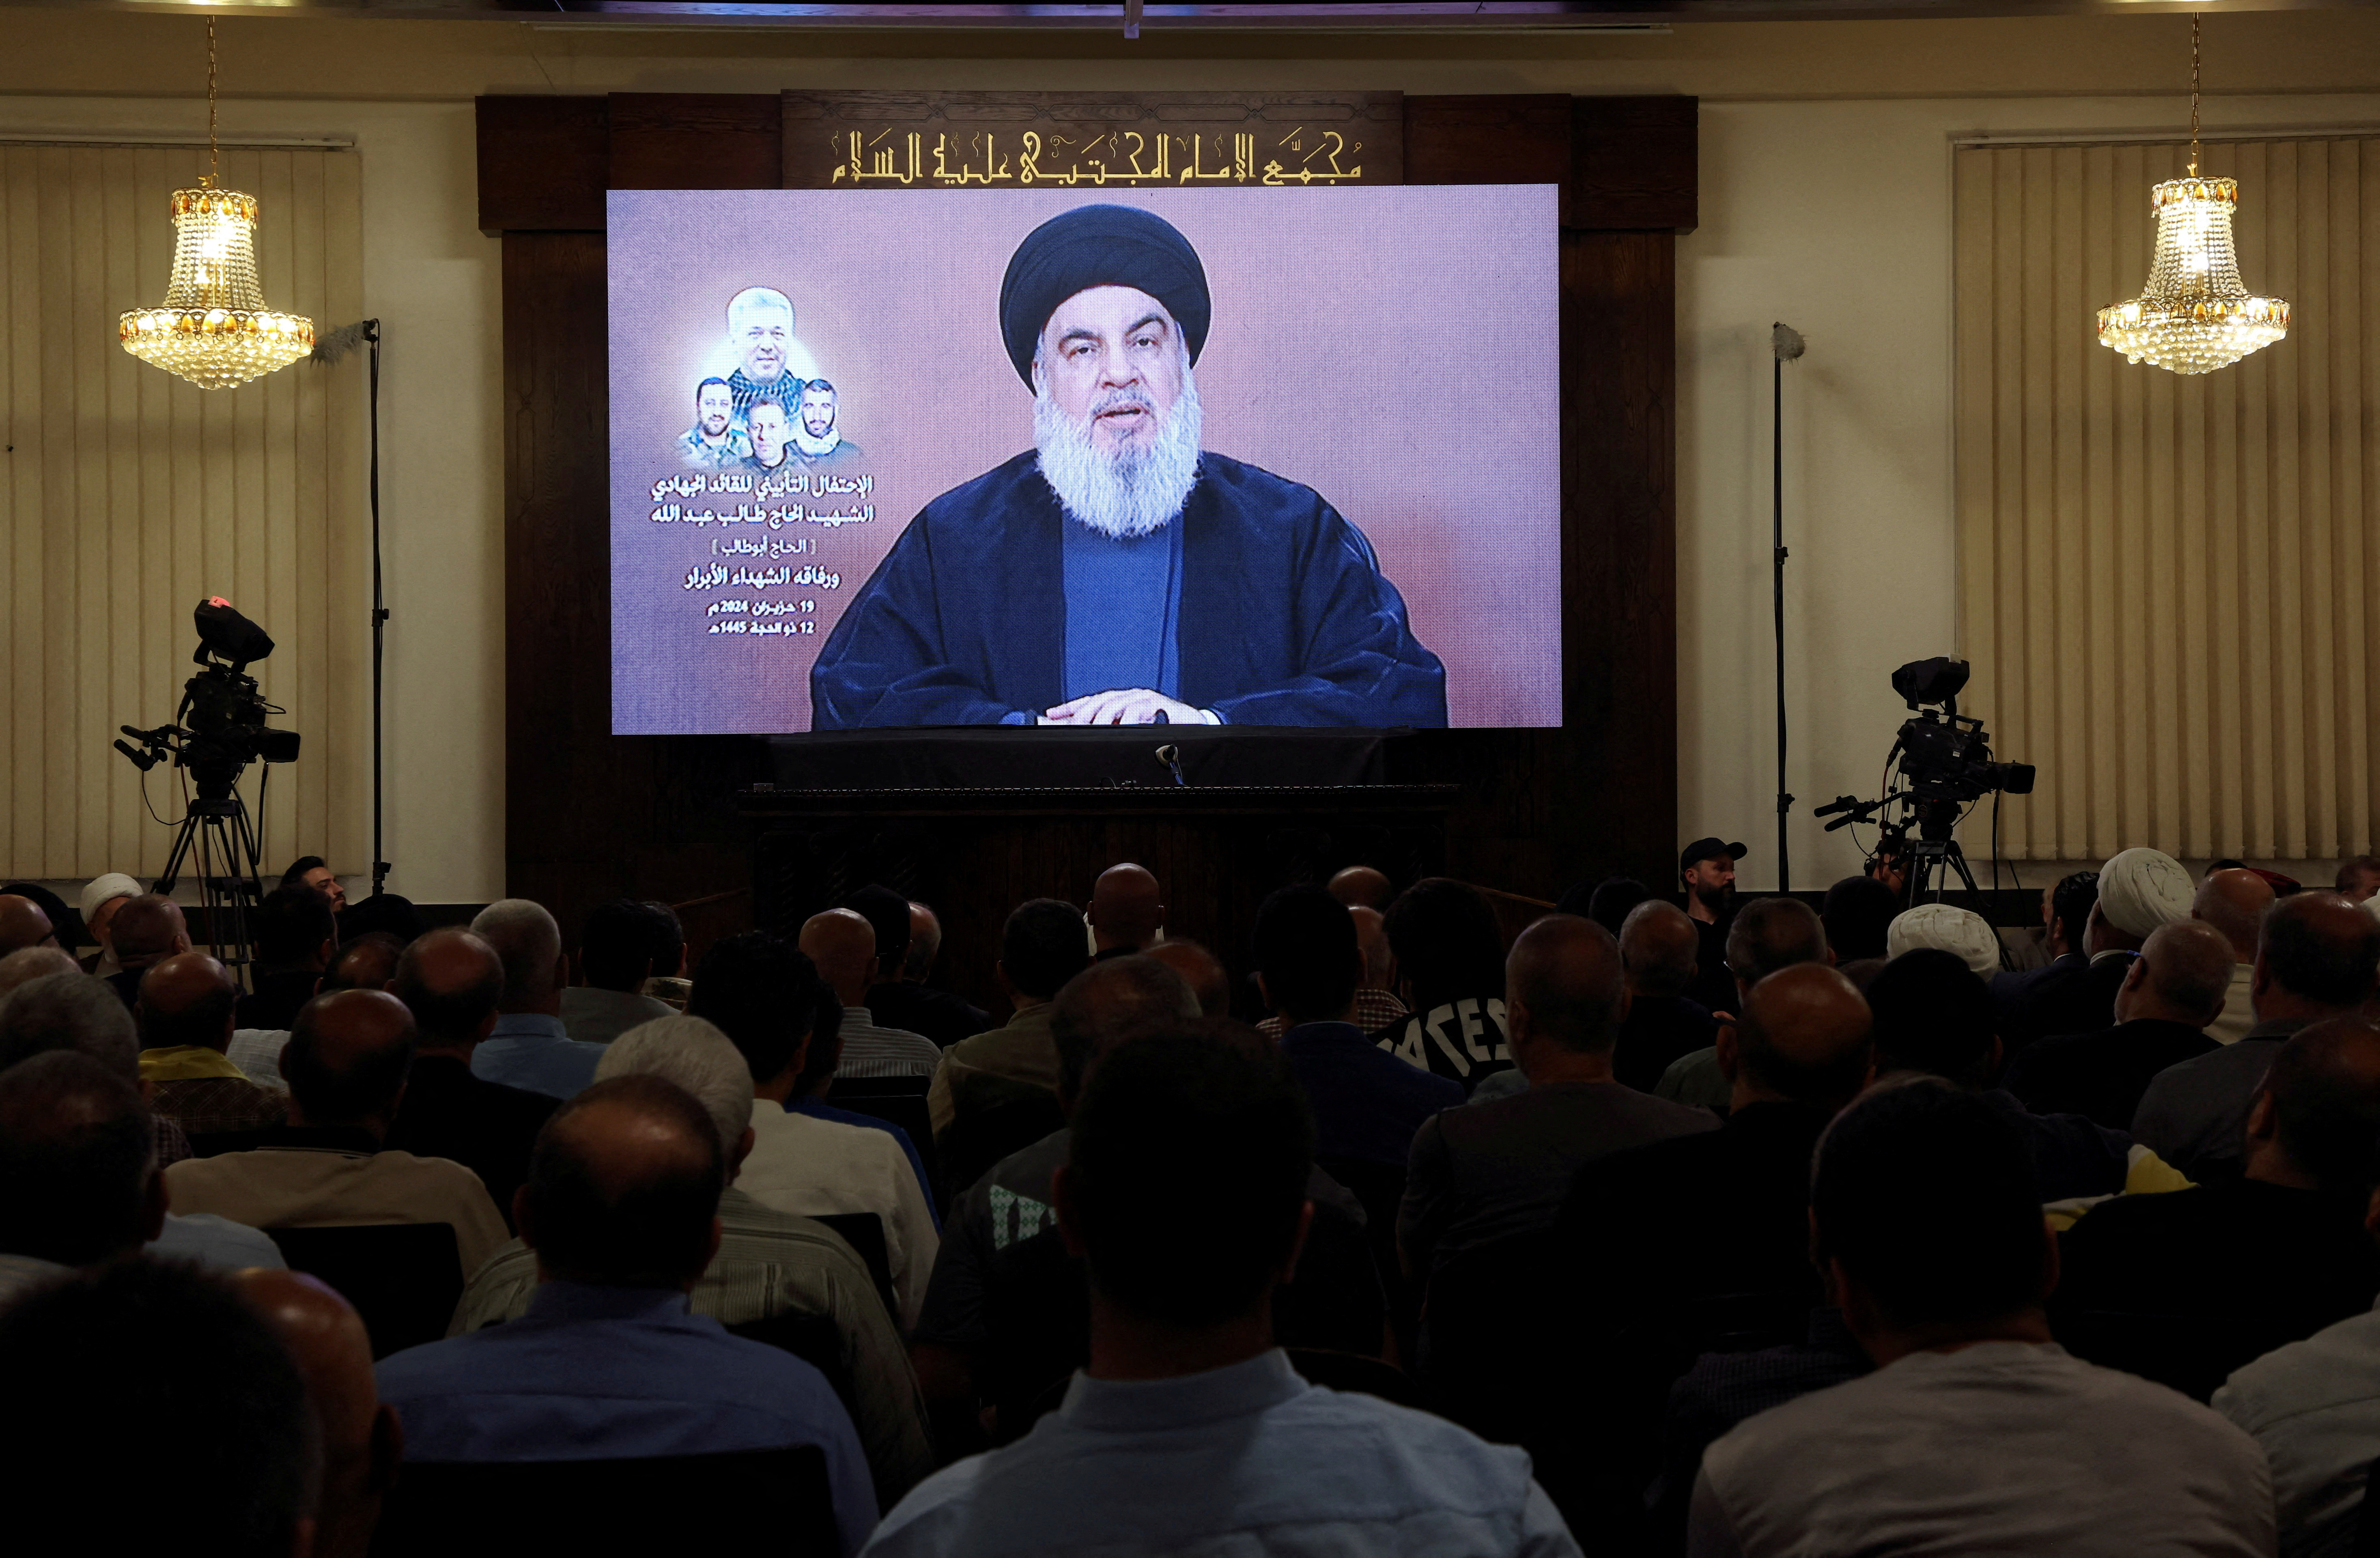 image Hezbollah leader threatens Cyprus, Christodoulides says &#8220;we are part of the solution&#8221;